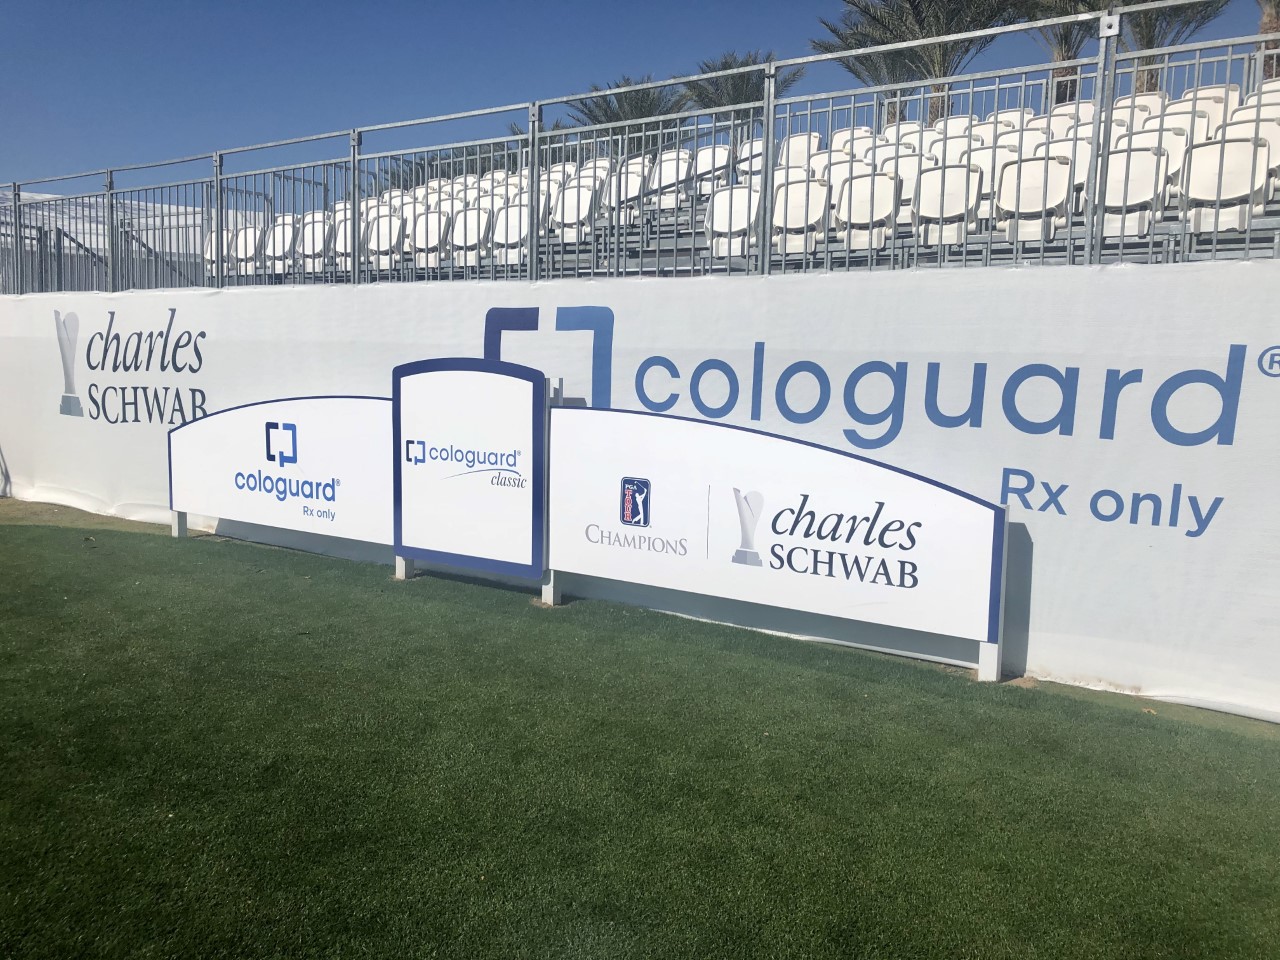 Cologuard Classic returns to Tucson